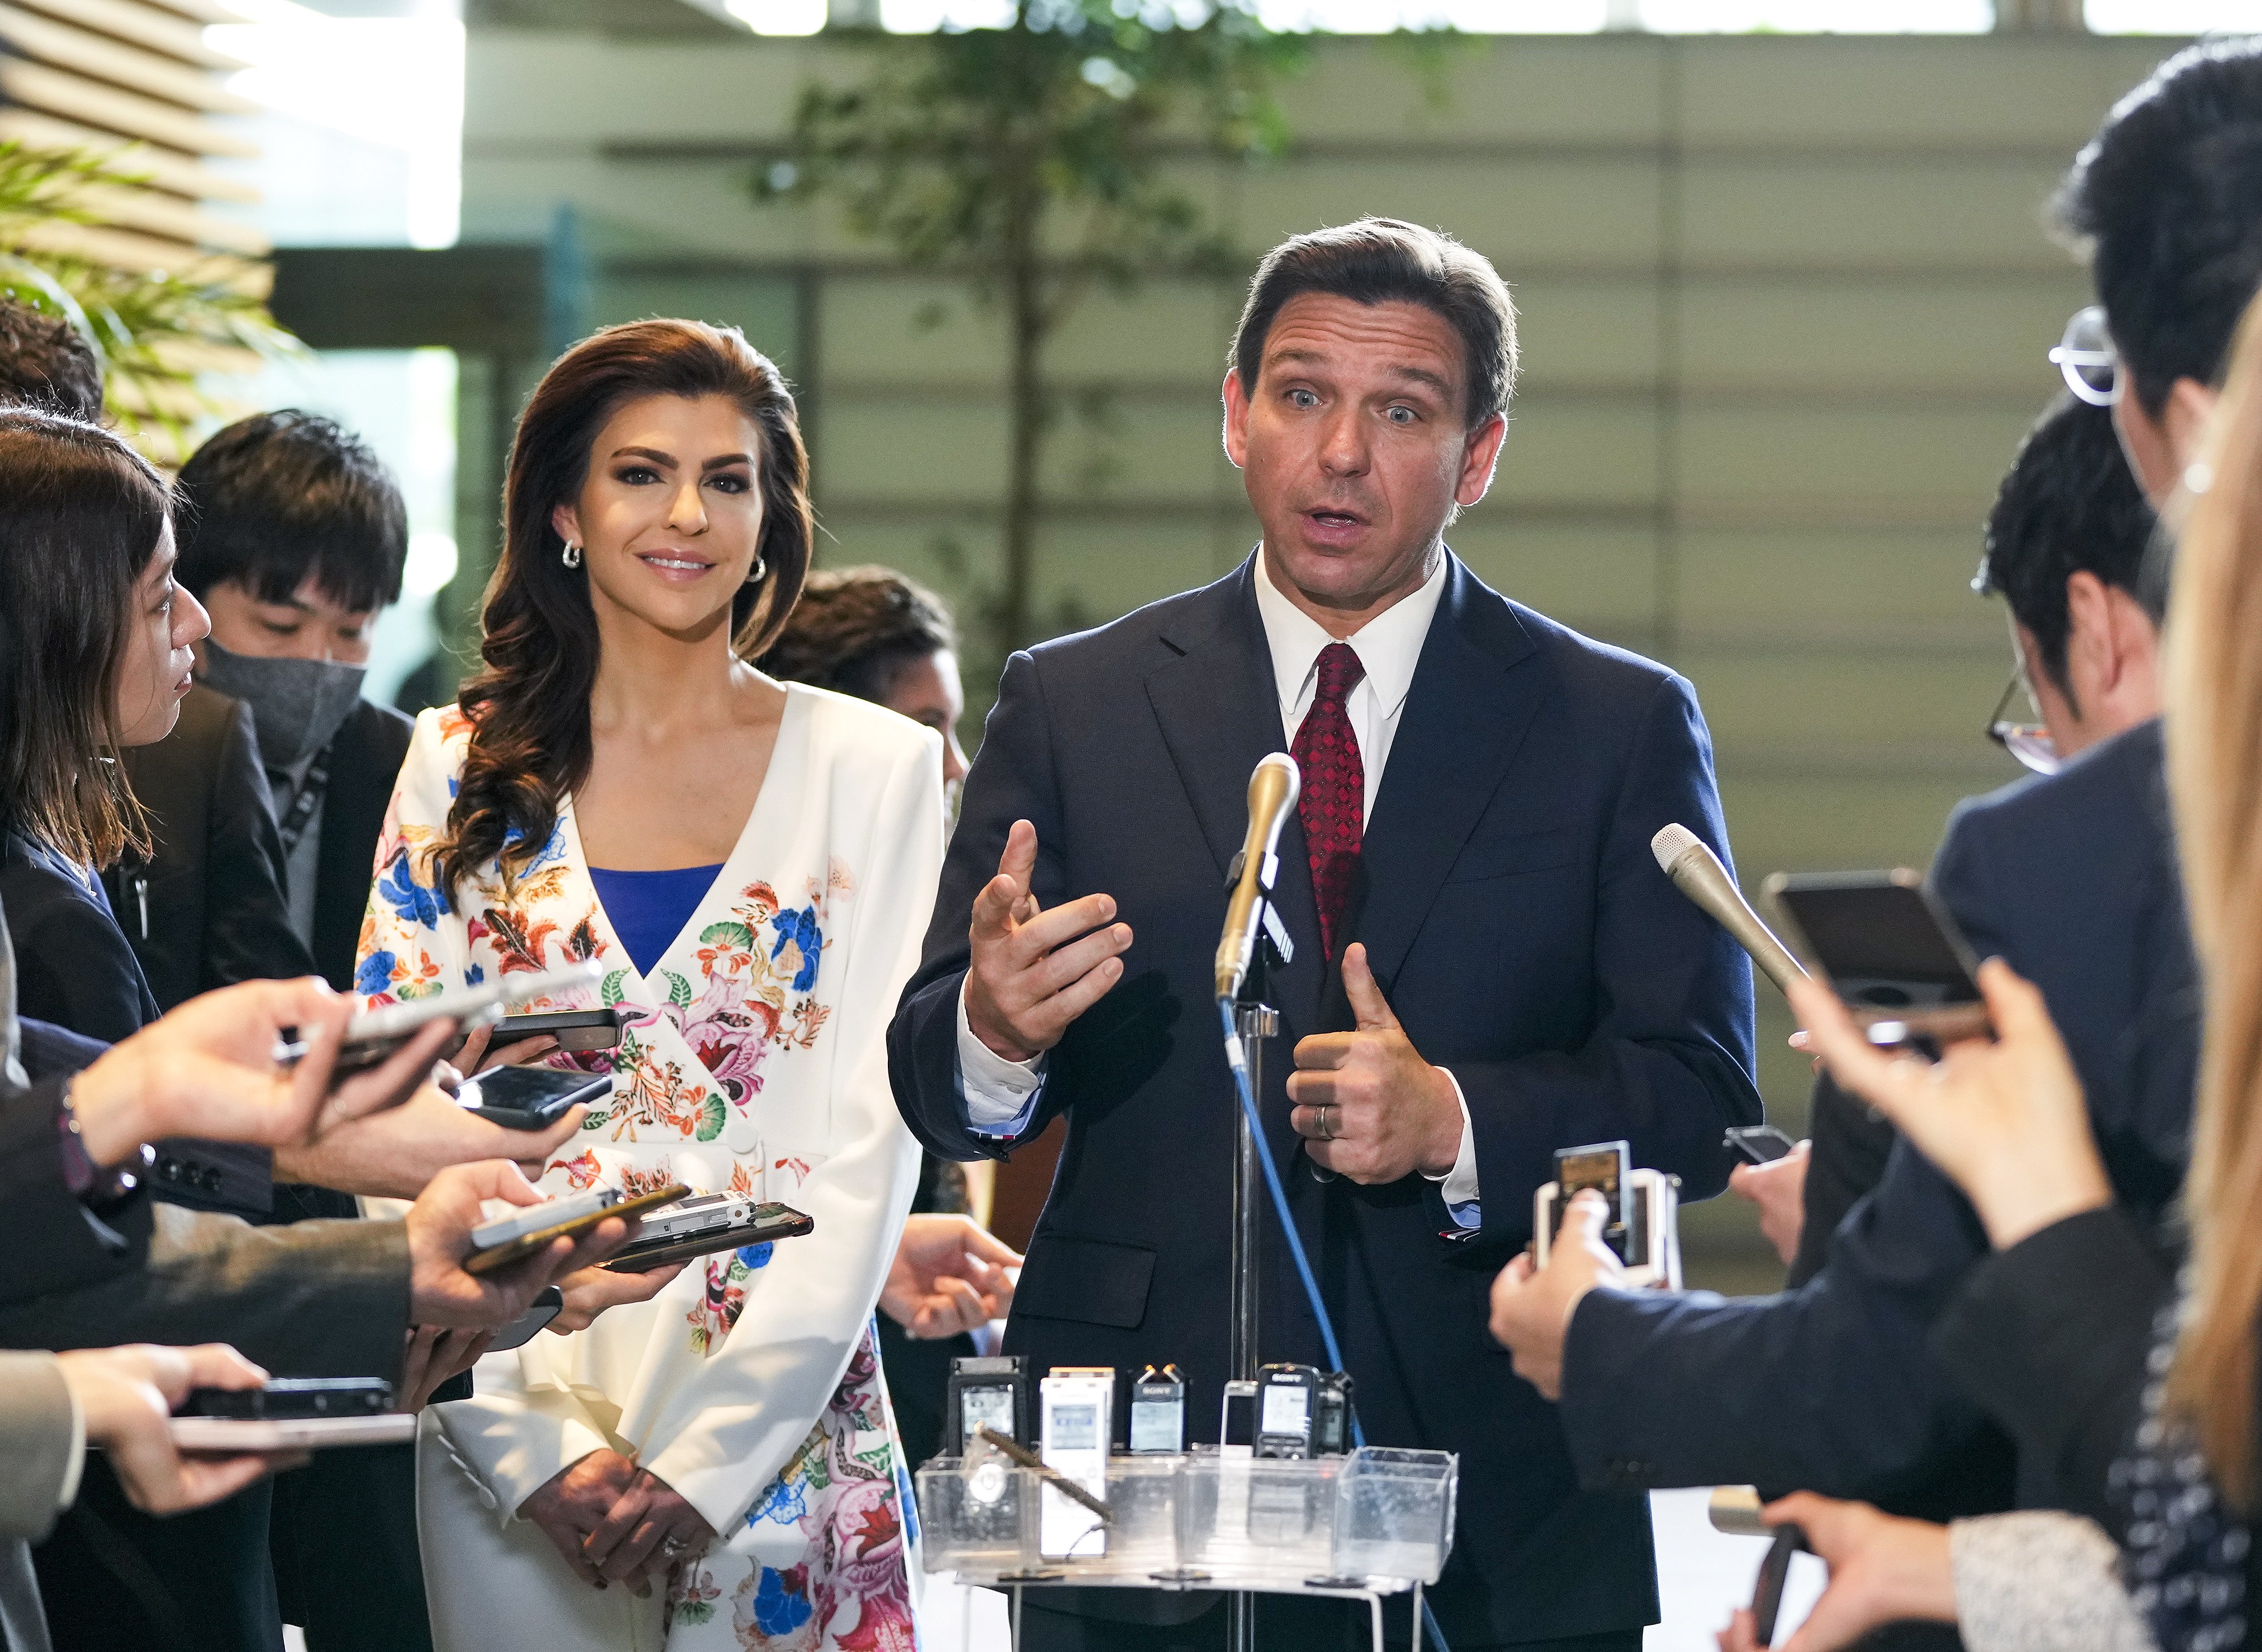 Ron DeSantis kicked off an international tour in Tokyo on Monday that’s seen as a bid to burnish his diplomatic and security credentials ahead of a 2024 presidential run. Photo: EPA-EFE